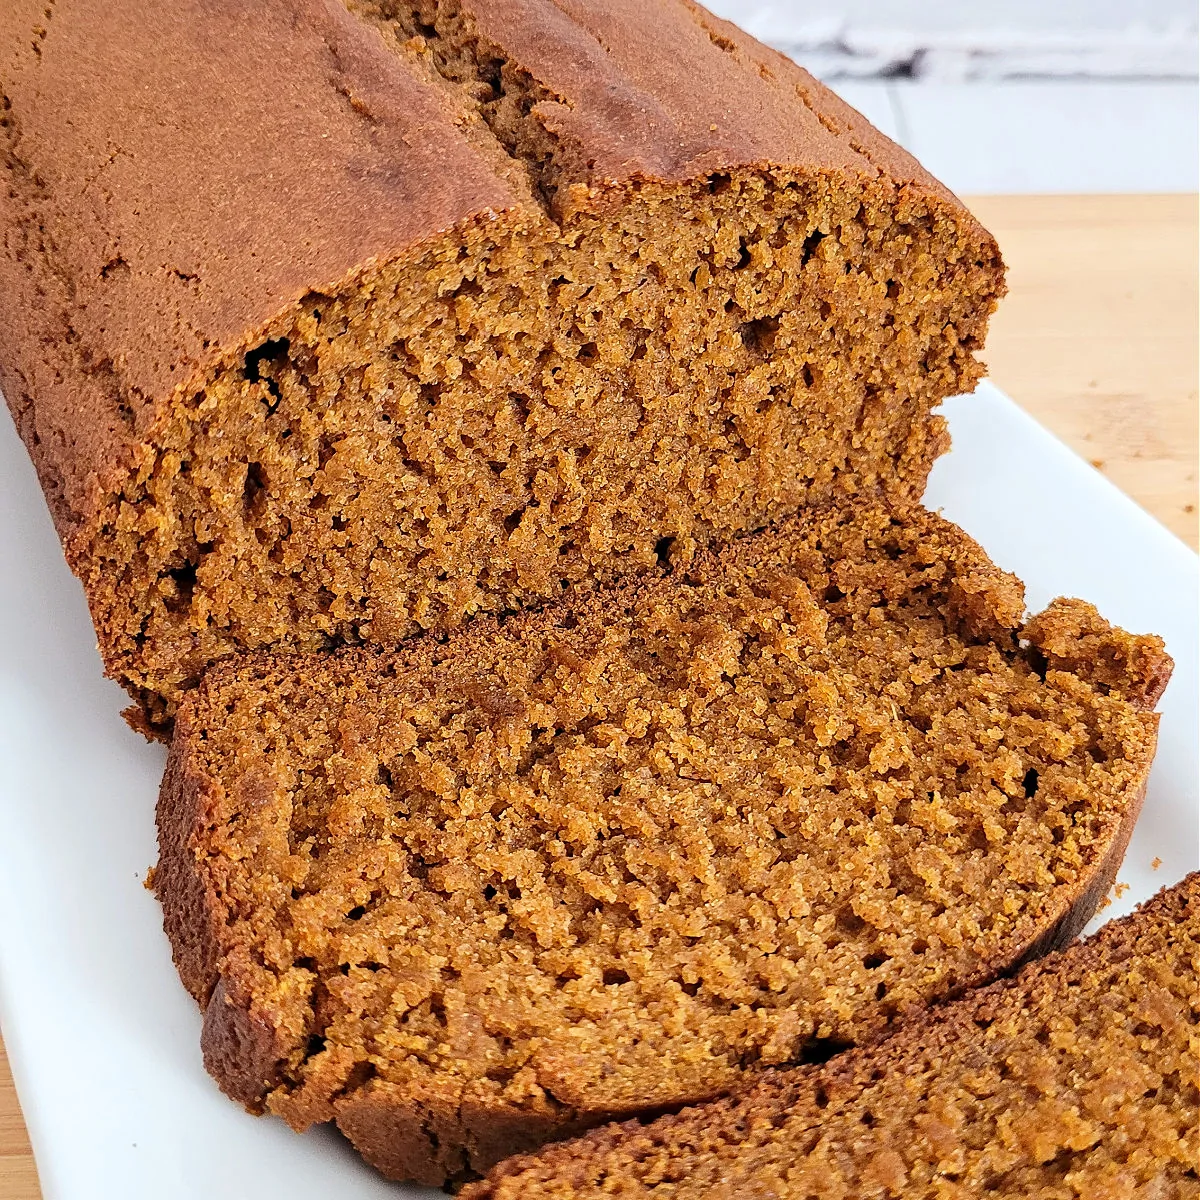 Gluten free pumpkin bread sliced and served on a white serving platter.